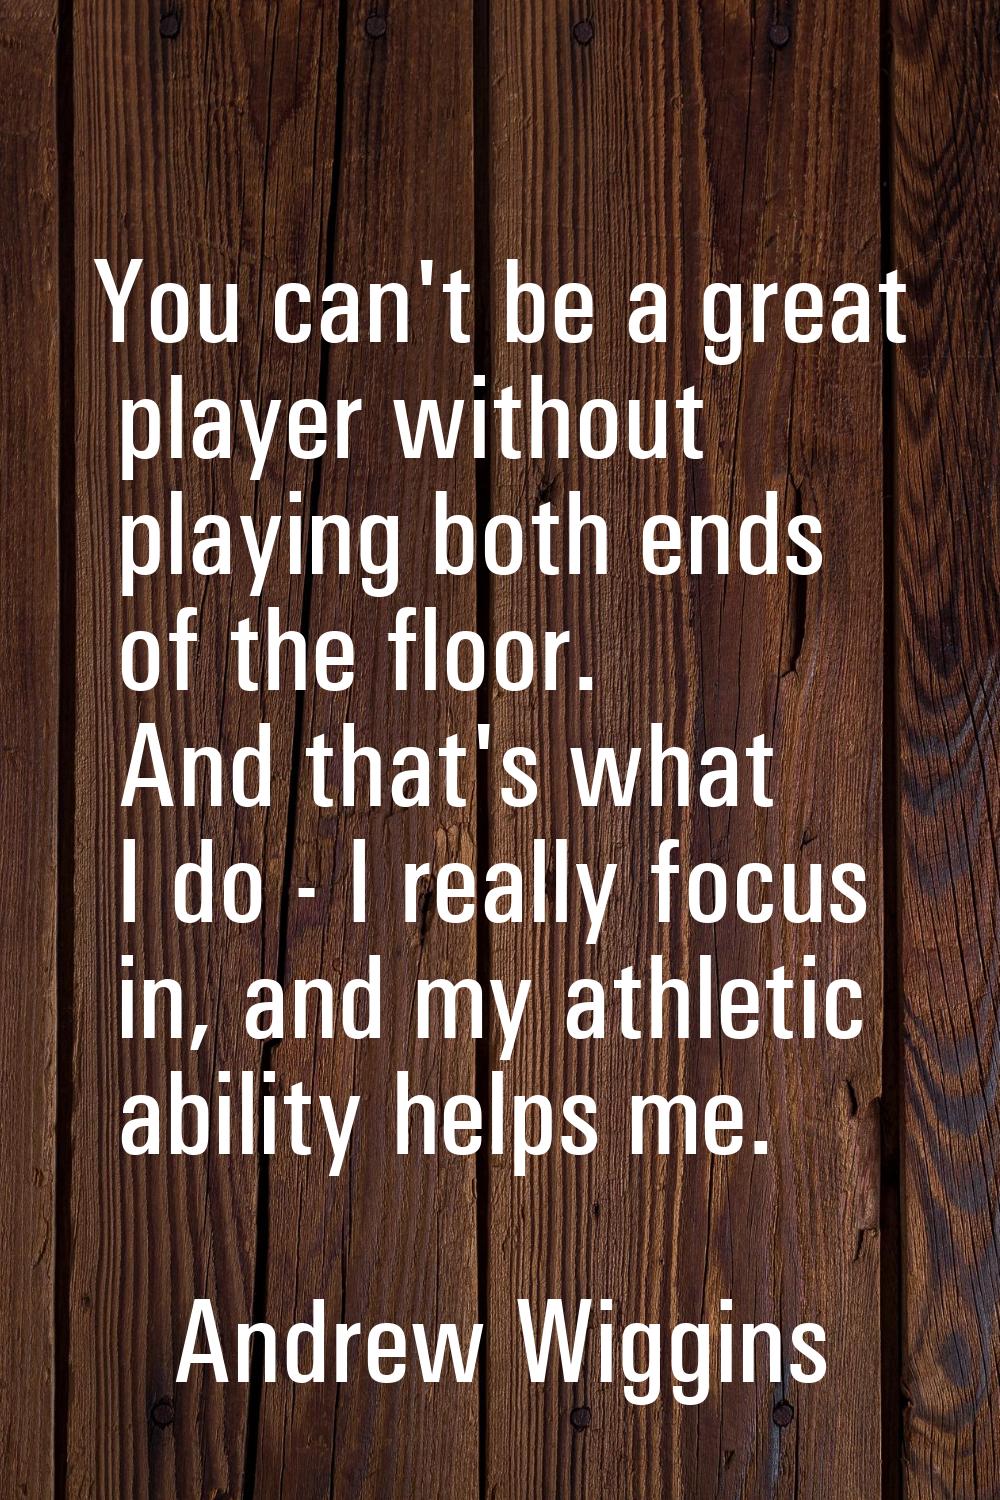 You can't be a great player without playing both ends of the floor. And that's what I do - I really